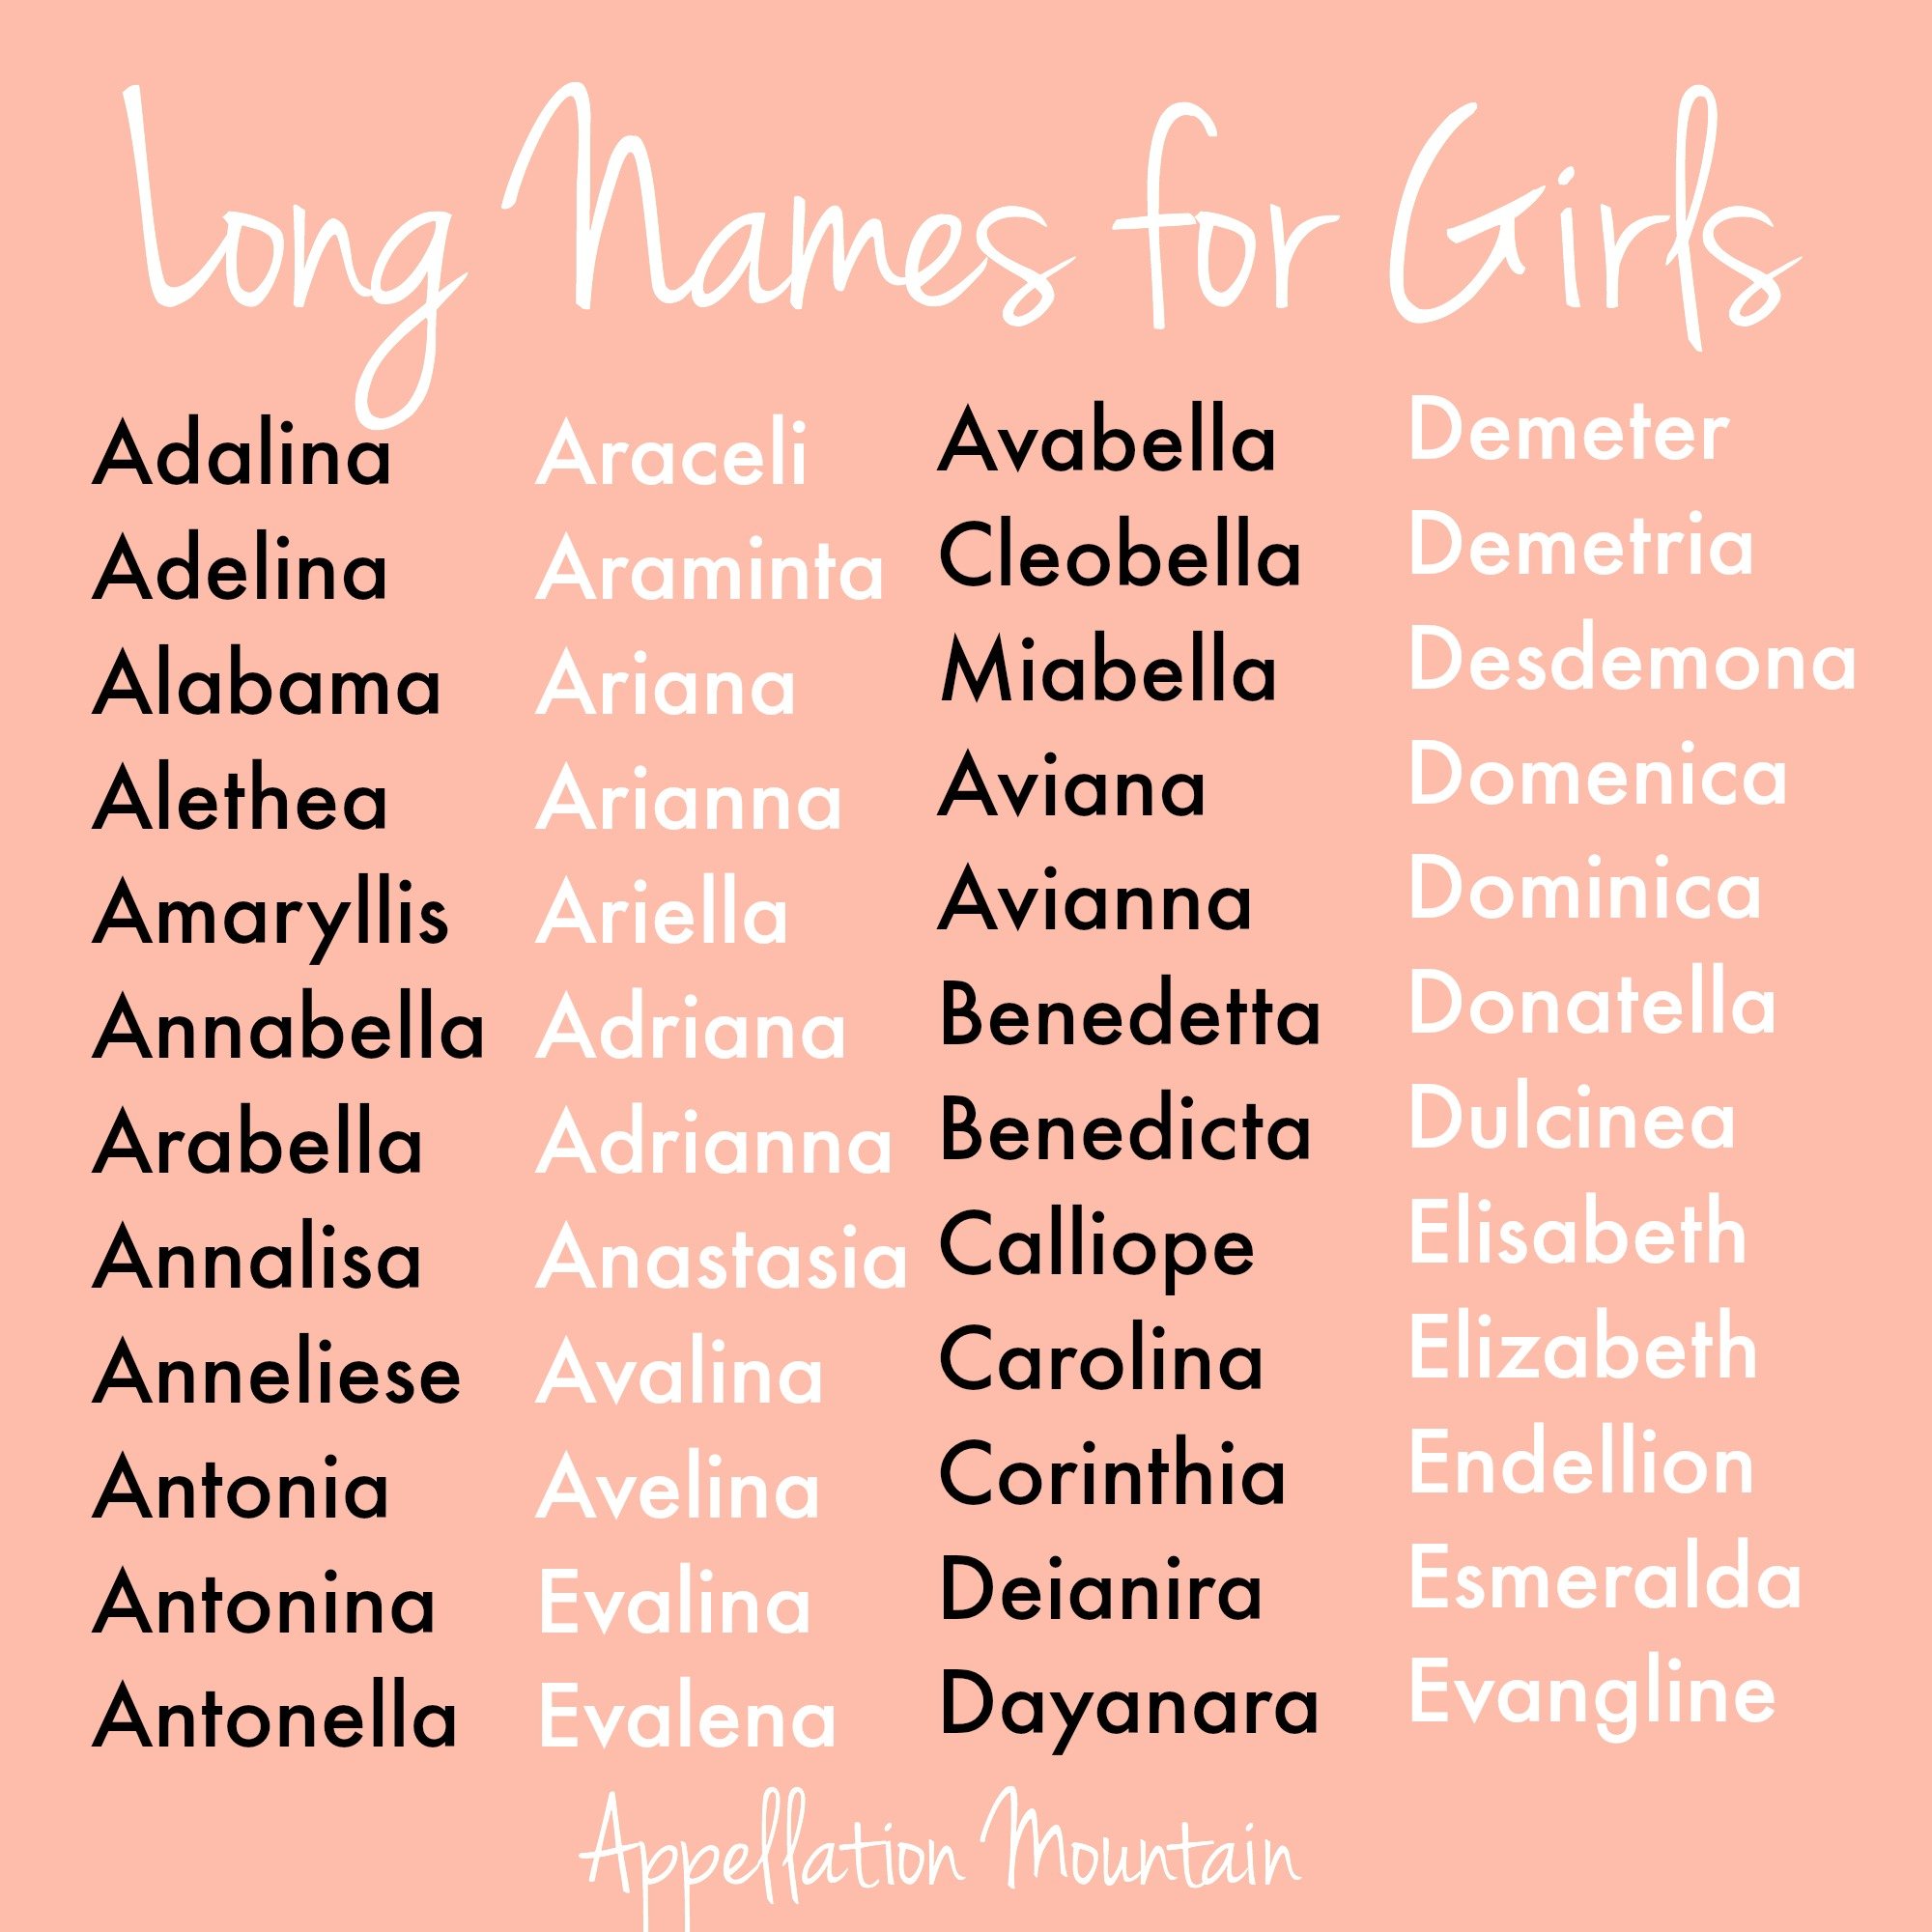 Long Names For Girls Elizabella And Anneliese Appellation Mountain